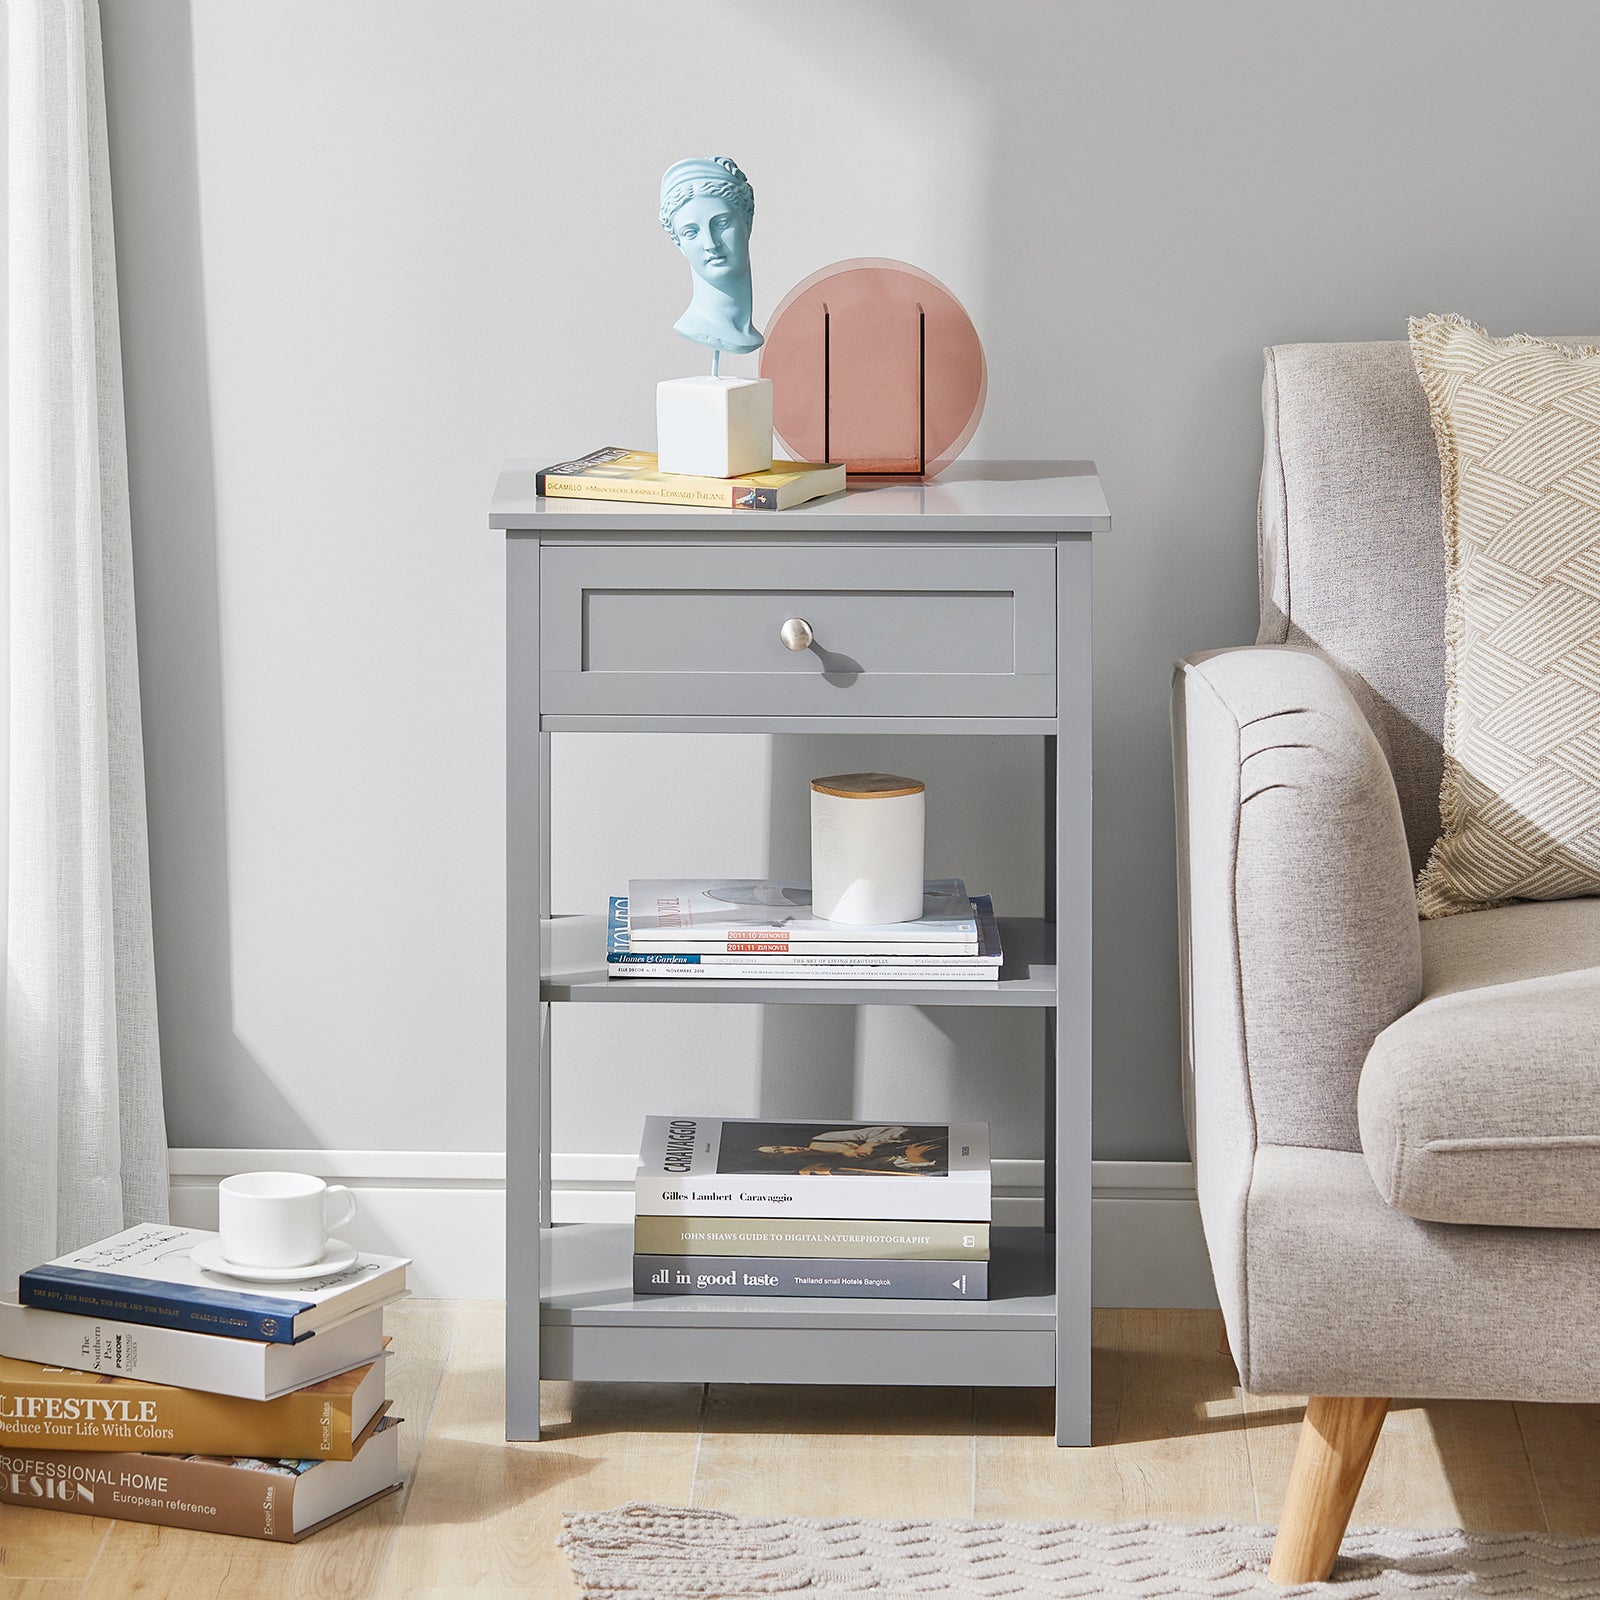 SoBuy FBT46-HG,Beside Table with 1 Drawer 2 Shelves,End Table Lamp Table Side Table Night Stand, Grey